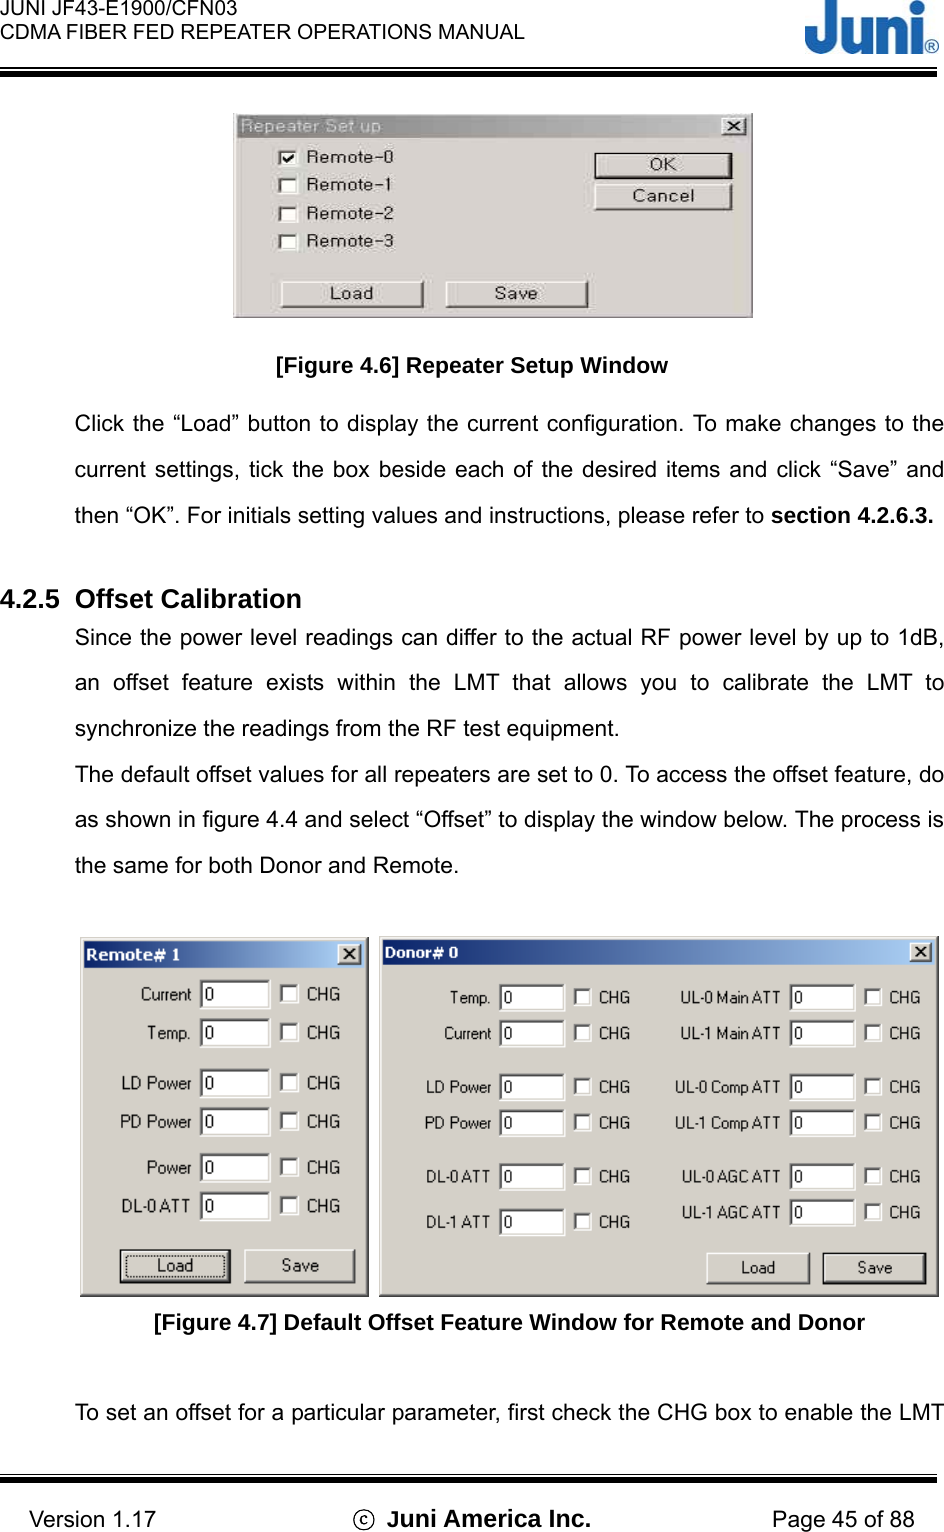  JUNI JF43-E1900/CFN03 CDMA FIBER FED REPEATER OPERATIONS MANUAL                                    Version 1.17  ⓒ Juni America Inc. Page 45 of 88  [Figure 4.6] Repeater Setup Window Click the “Load” button to display the current configuration. To make changes to the current settings, tick the box beside each of the desired items and click “Save” and then “OK”. For initials setting values and instructions, please refer to section 4.2.6.3.  4.2.5 Offset Calibration Since the power level readings can differ to the actual RF power level by up to 1dB, an offset feature exists within the LMT that allows you to calibrate the LMT to synchronize the readings from the RF test equipment. The default offset values for all repeaters are set to 0. To access the offset feature, do as shown in figure 4.4 and select “Offset” to display the window below. The process is the same for both Donor and Remote.     [Figure 4.7] Default Offset Feature Window for Remote and Donor  To set an offset for a particular parameter, first check the CHG box to enable the LMT 